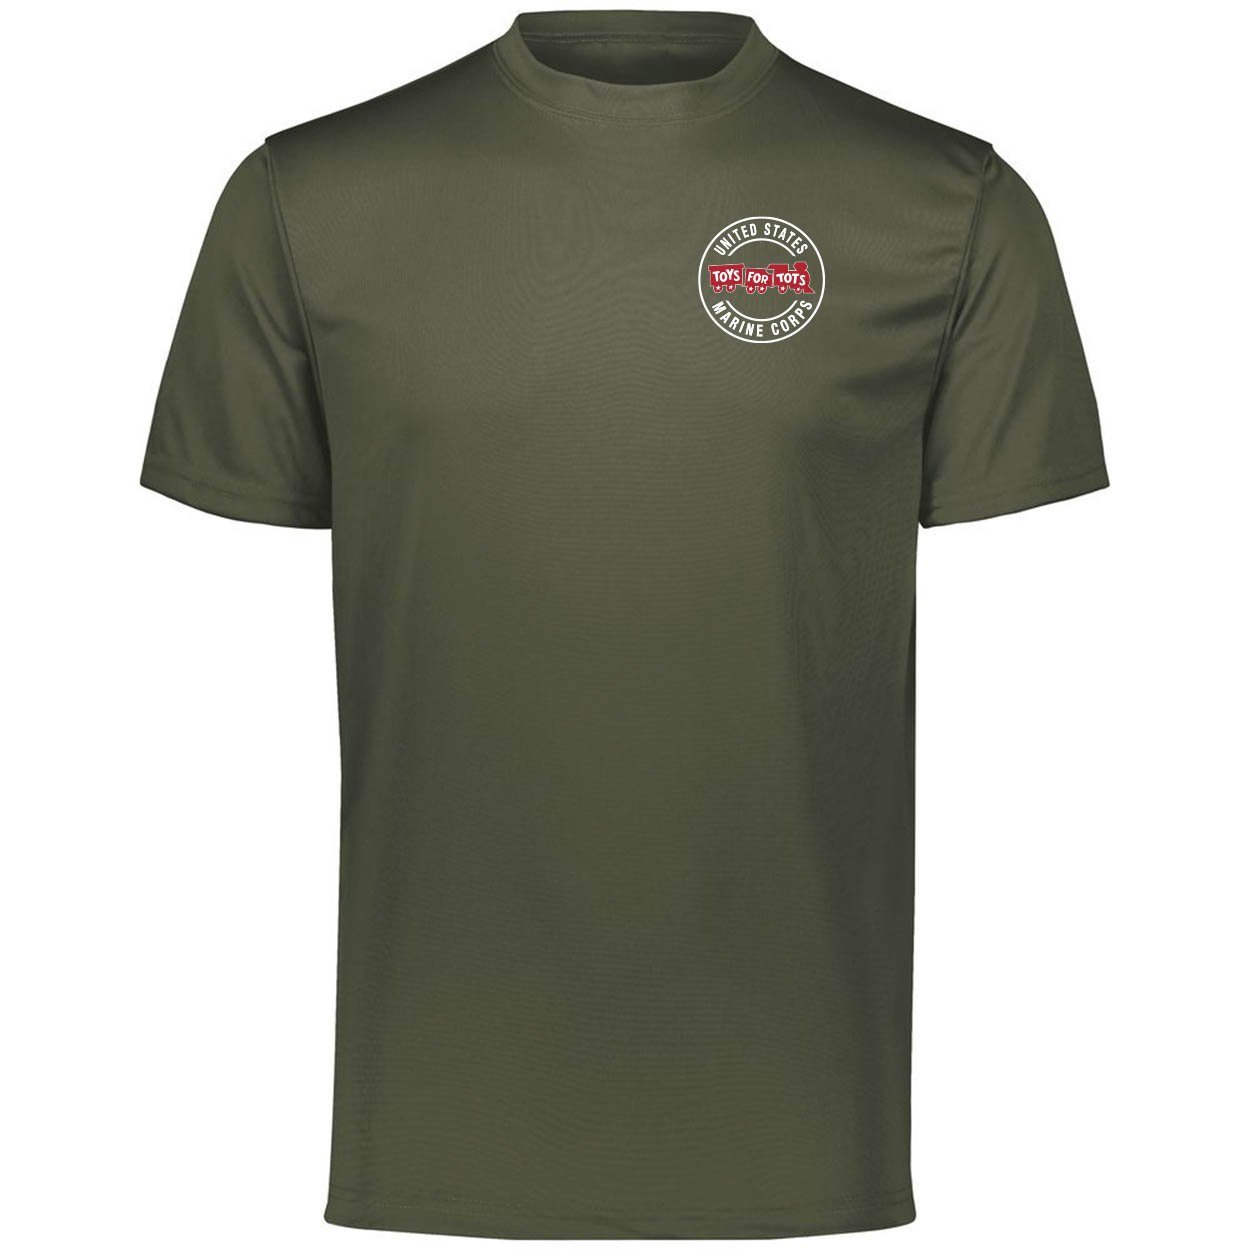 Augusta Dri-Fit Performance Circle TFT Chest Seal T-Shirt TFT Shirt Marine Corps Direct S MILITARY GREEN 